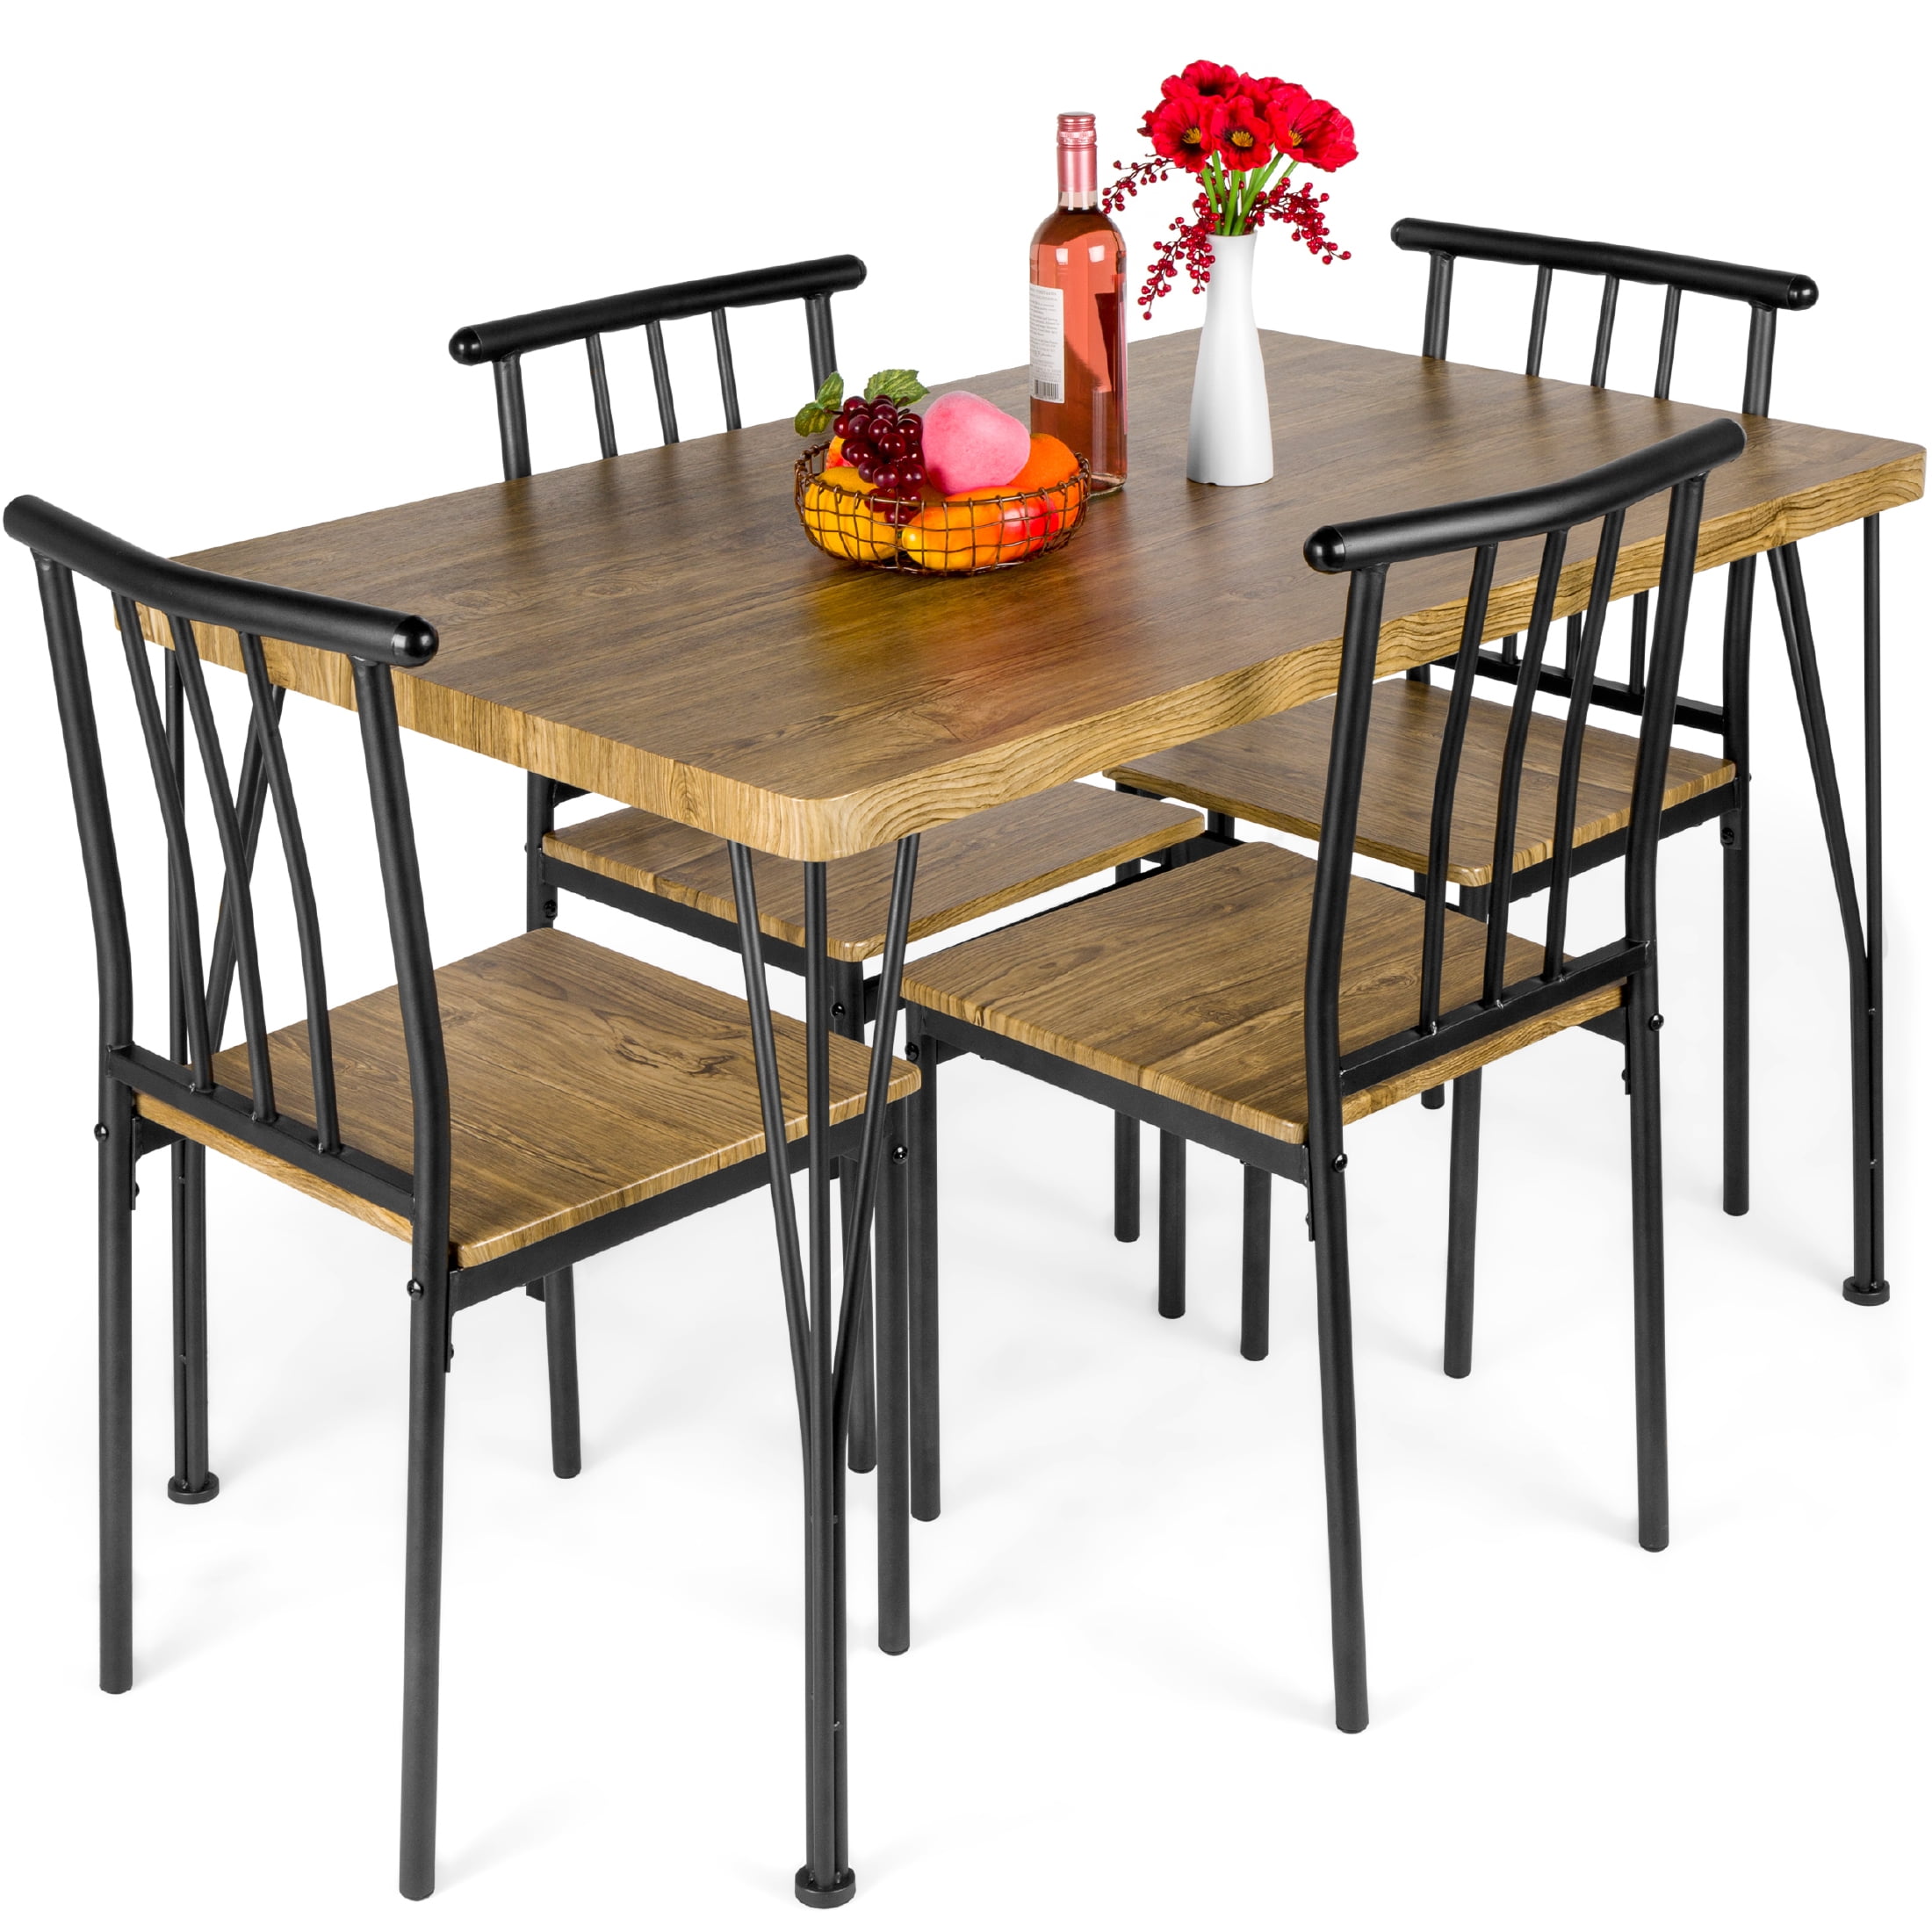 Skraut Home - Fixed dining table - 76 x 160 x 90 cm - Capacity up to 6  people - Metal X-legs - X-Loft model - Solid oak/black wood finish :  : Home & Kitchen